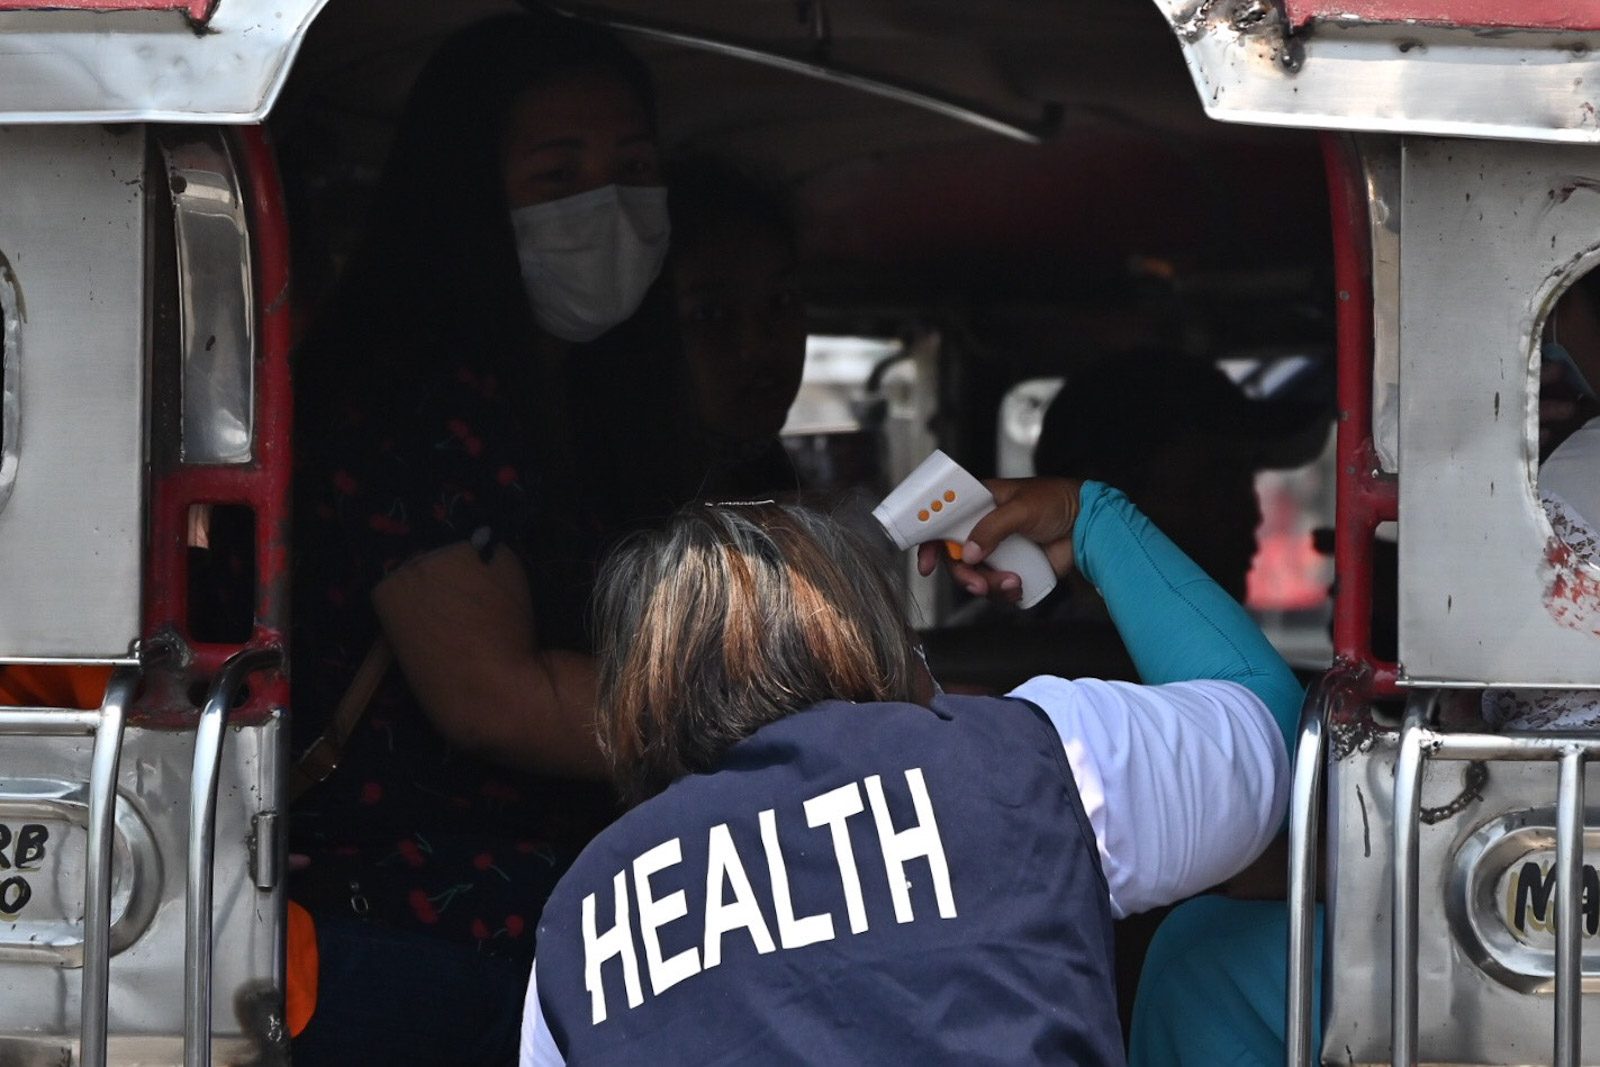 LGUs to figure out how health workers will go to work during Luzon quarantine